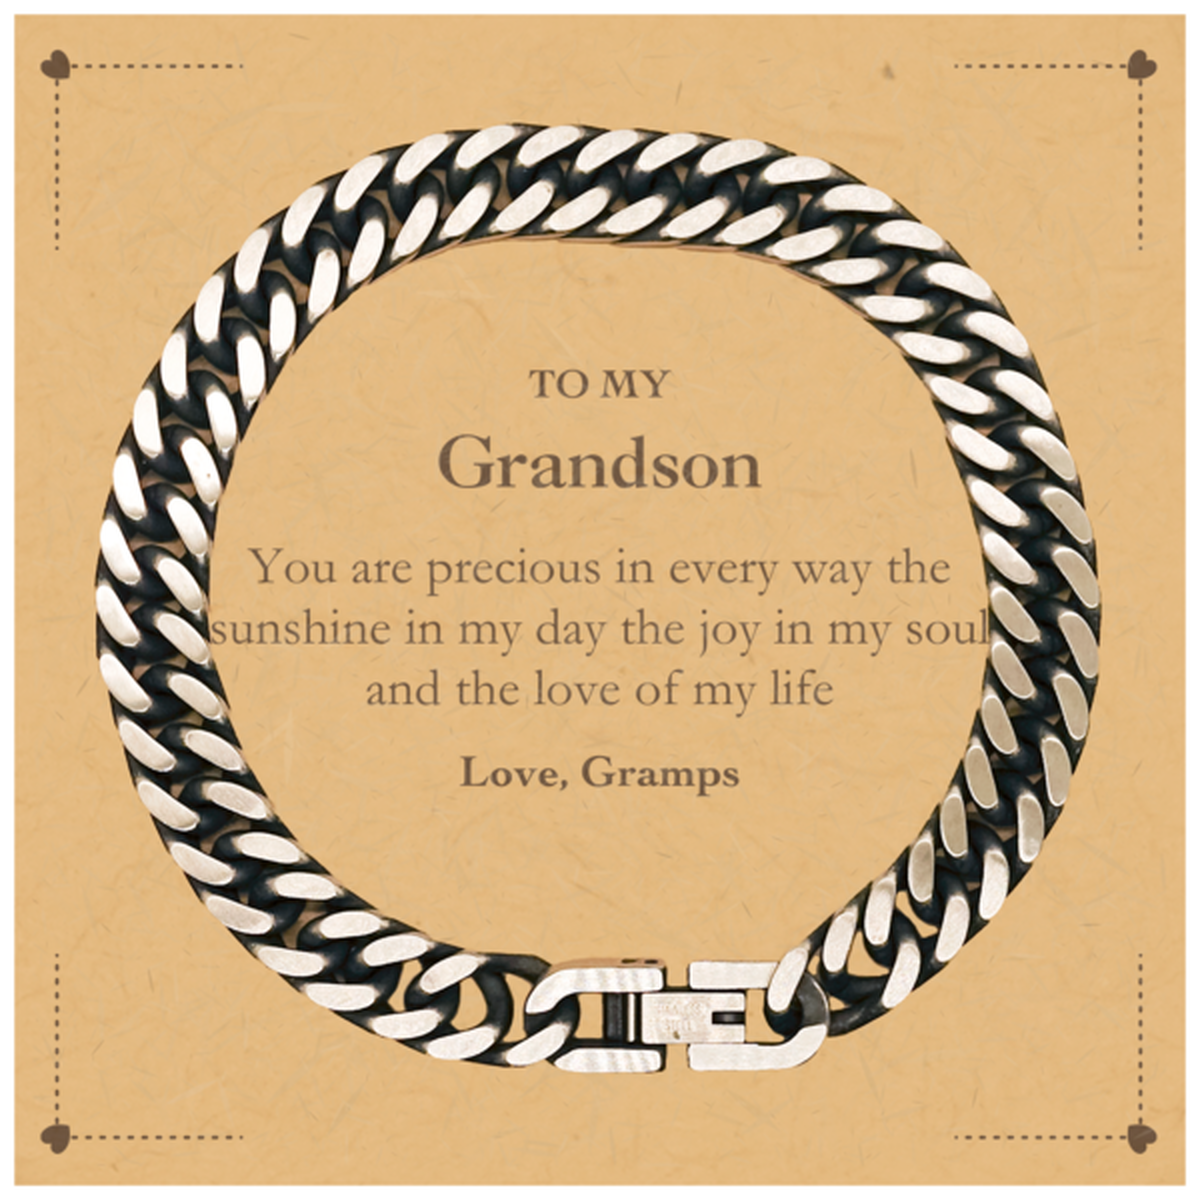 Graduation Gifts for Grandson Cuban Link Chain Bracelet Present from Gramps, Christmas Grandson Birthday Gifts Grandson You are precious in every way the sunshine in my day. Love, Gramps